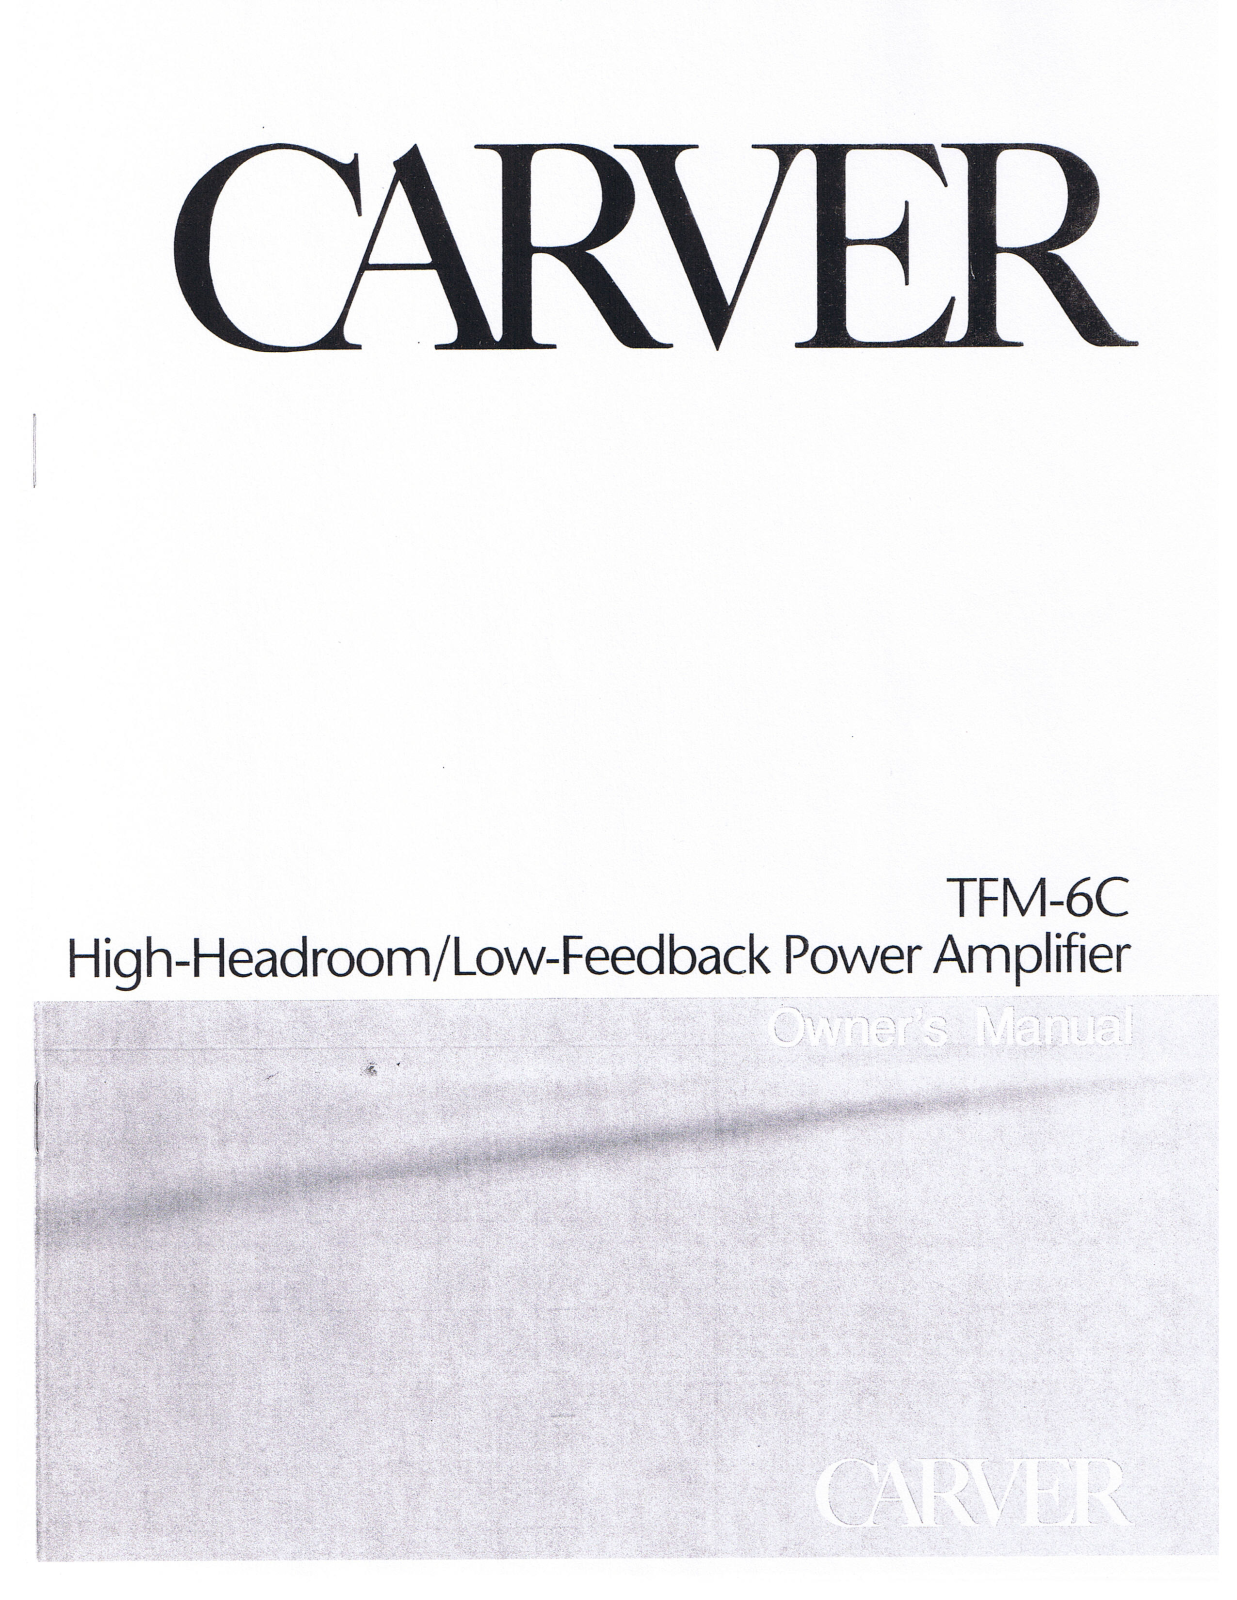 Carver TFM-6-C Owners manual